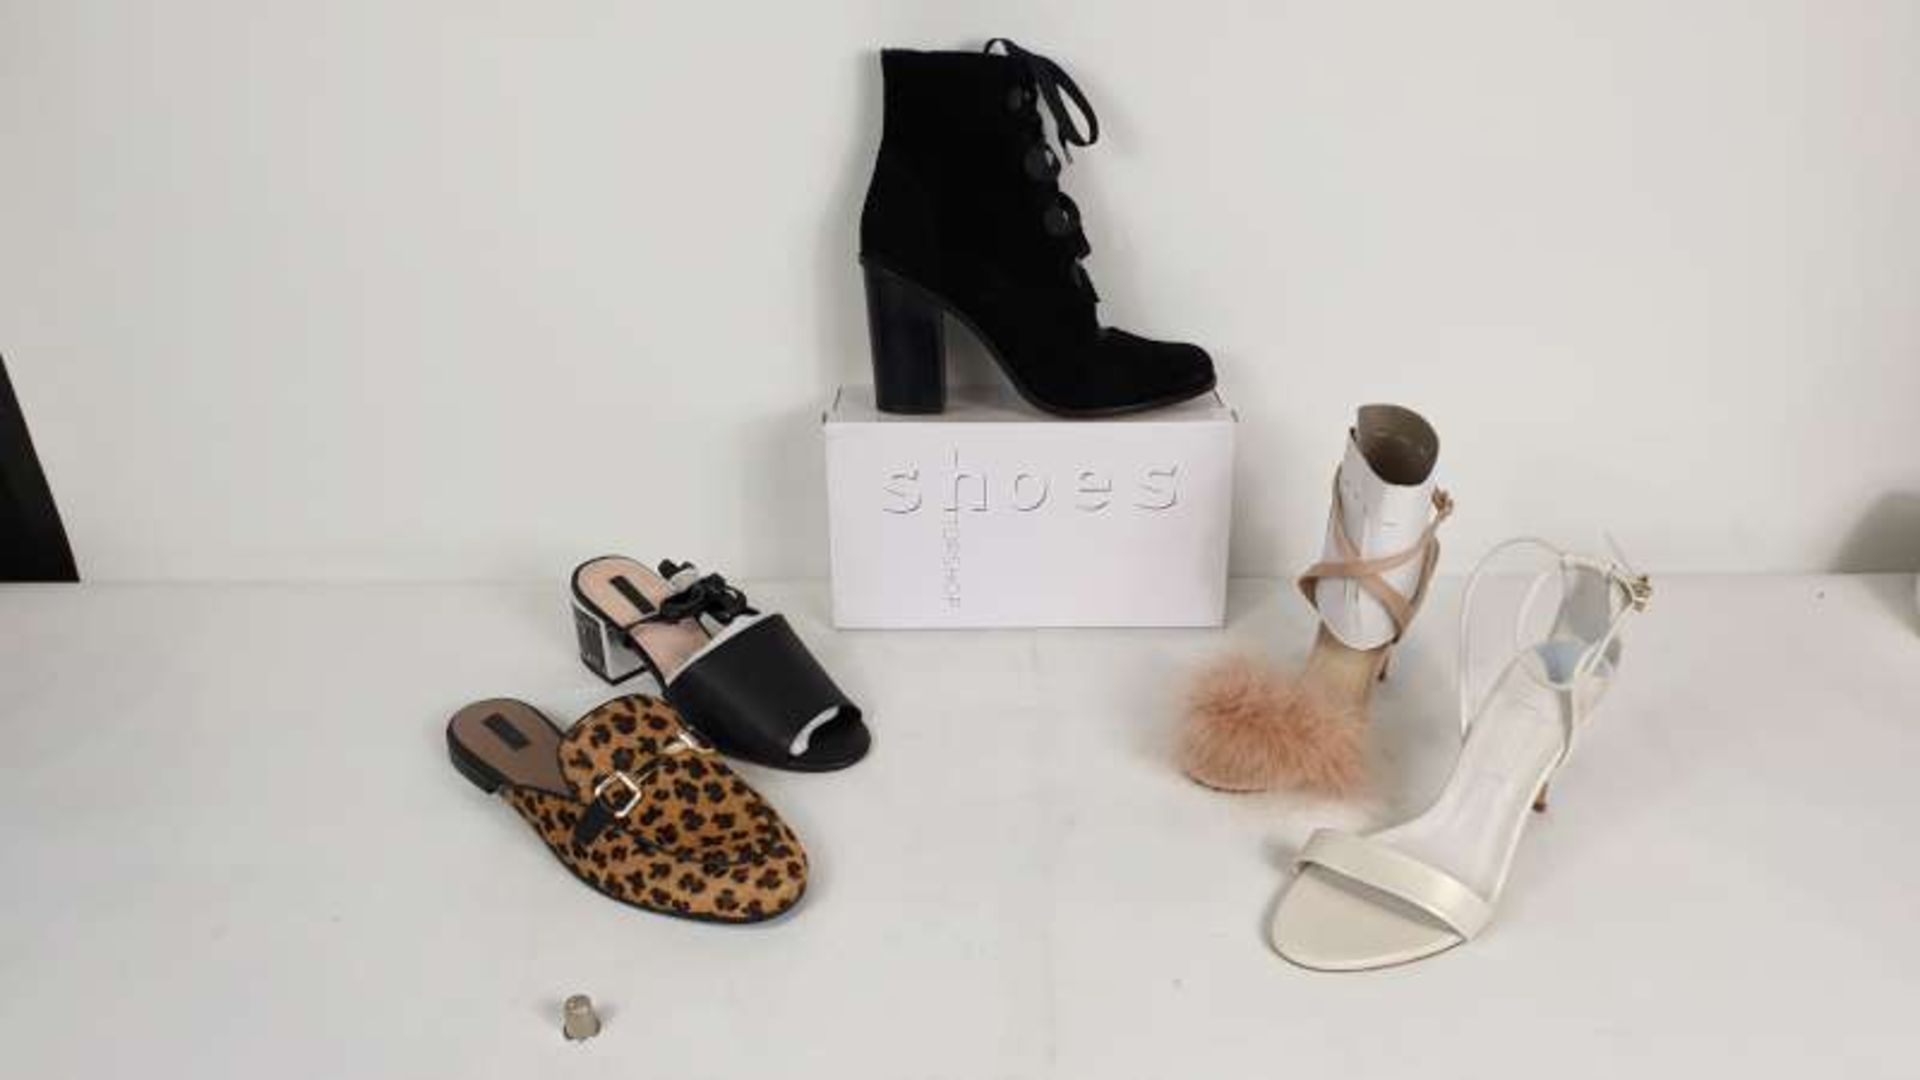 20 X PAIRS OF TOPSHOP SHOES IN VARIOUS STYLES / SIZES / COLOURS